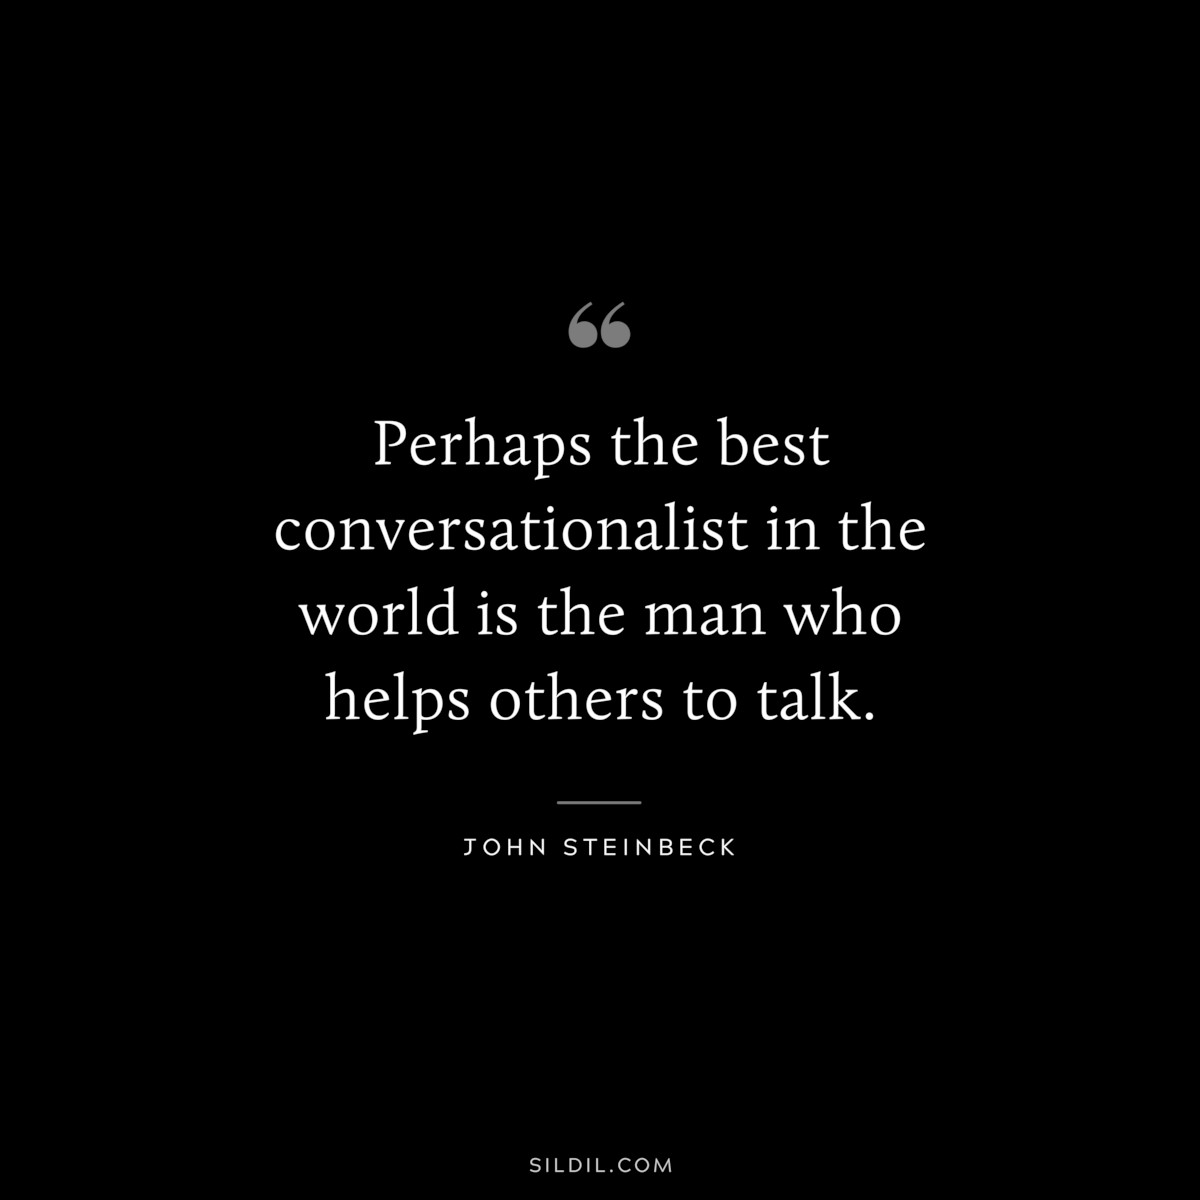 Perhaps the best conversationalist in the world is the man who helps others to talk.― John Steinbeck